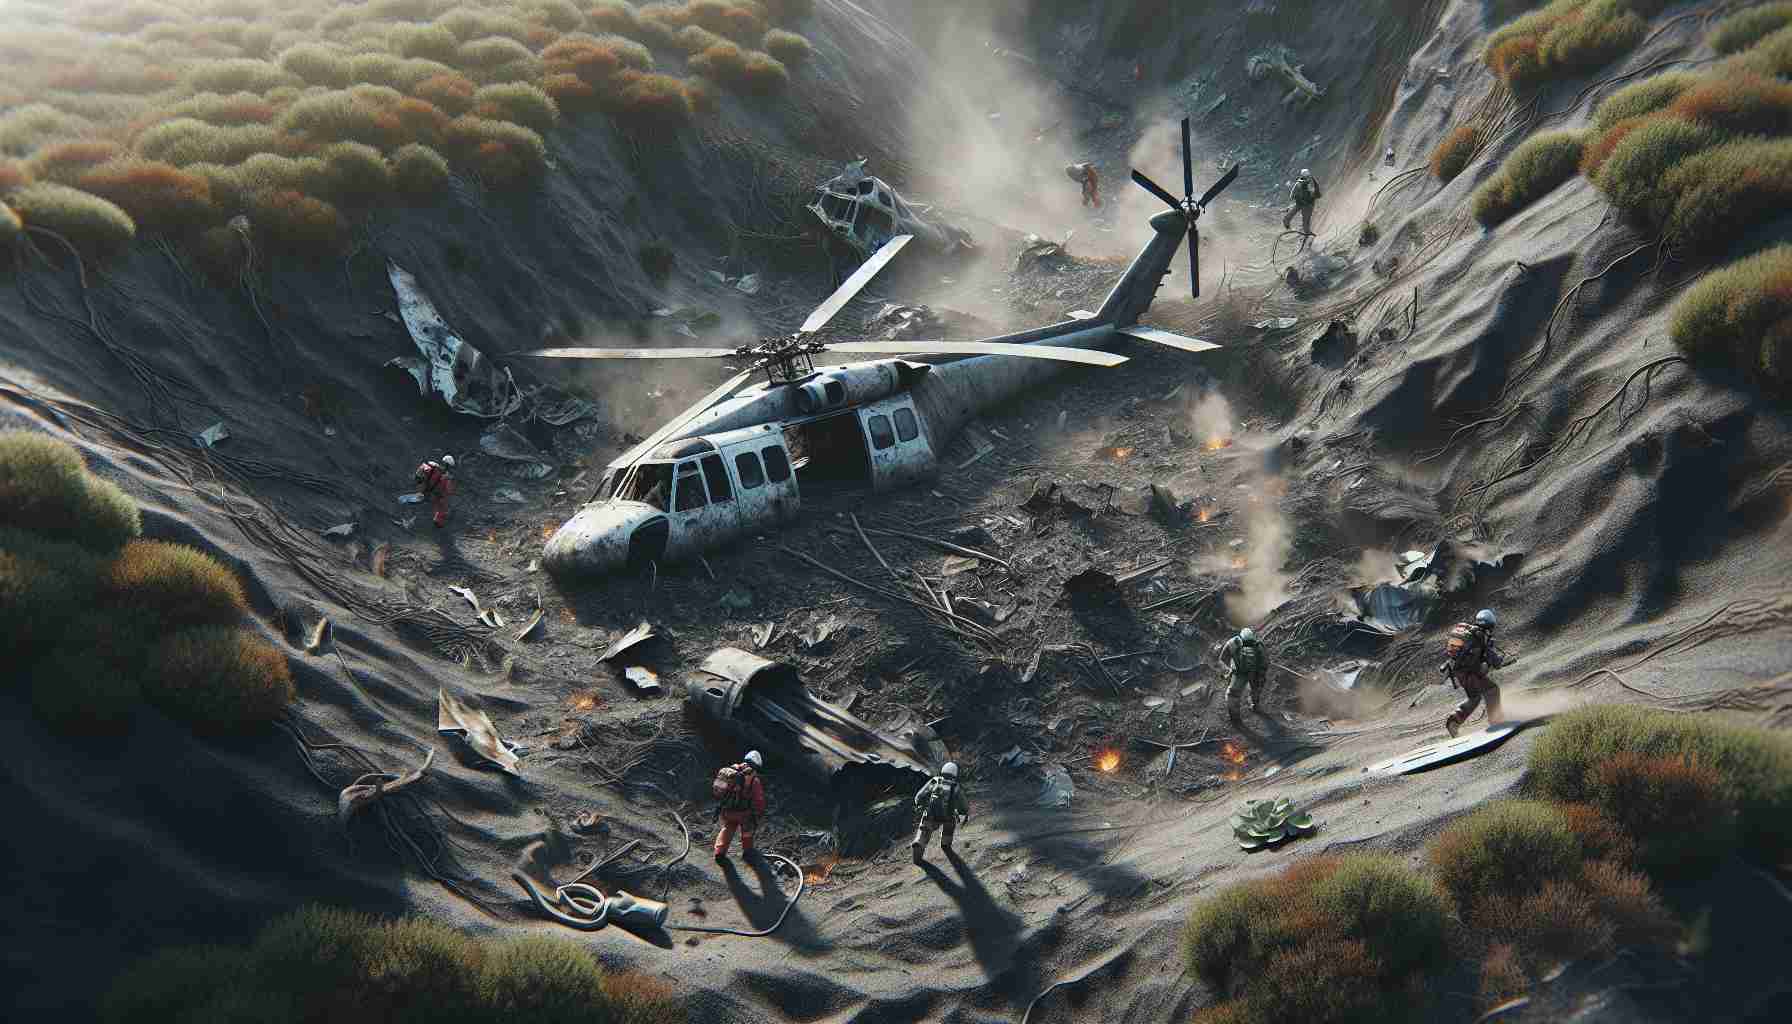 High-definition imaginary rendering of a realistic helicopter crash aftermath in a rugged terrain. The scene includes search and rescue teams diligently exploring the crash site, however, signs of the missing pair they are looking for can't be found. Patches of burned ground, wrecked metal pieces, and debris are scattered around in the area.